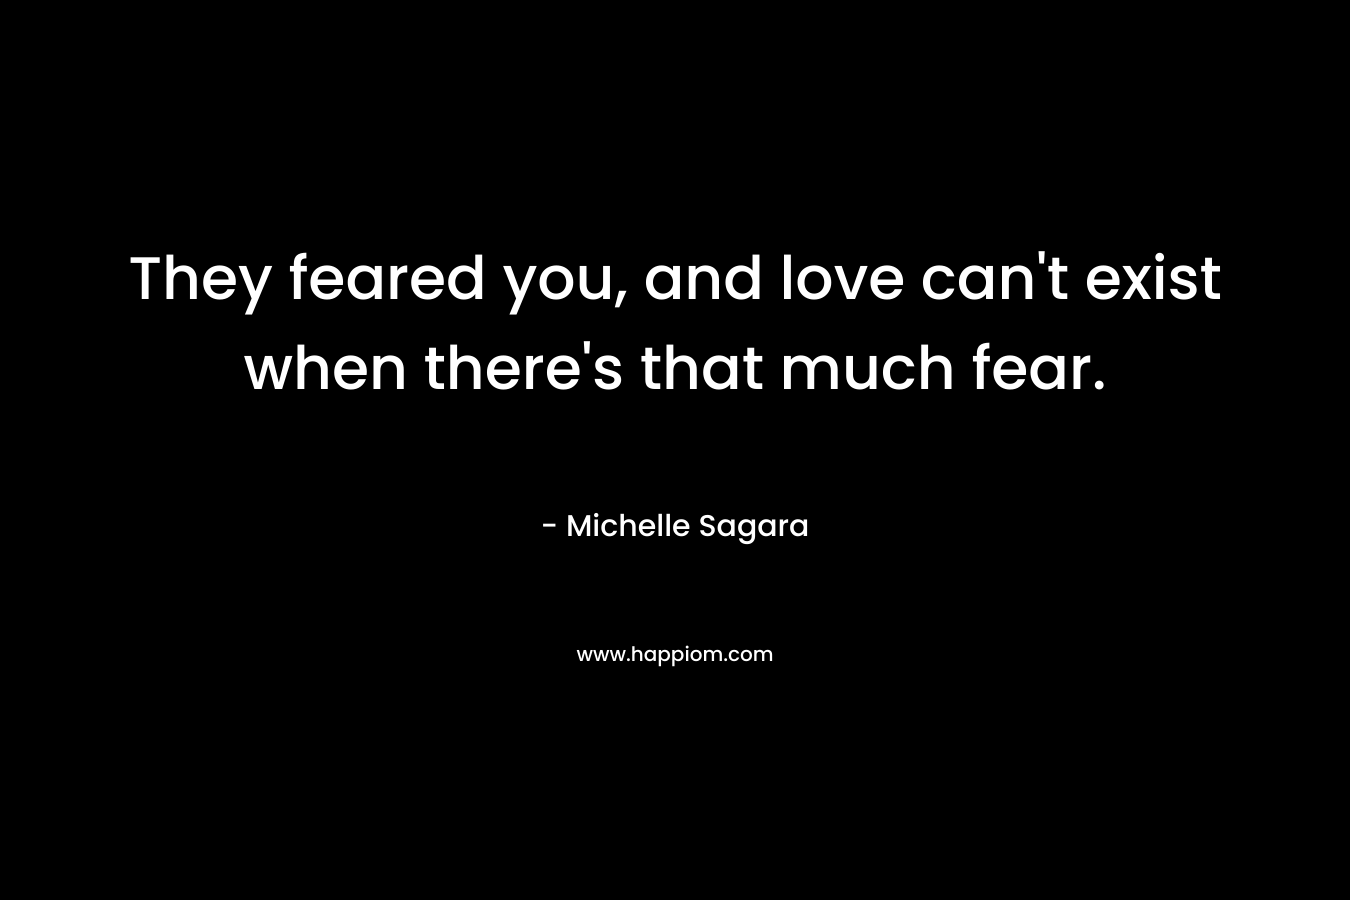 They feared you, and love can’t exist when there’s that much fear. – Michelle Sagara